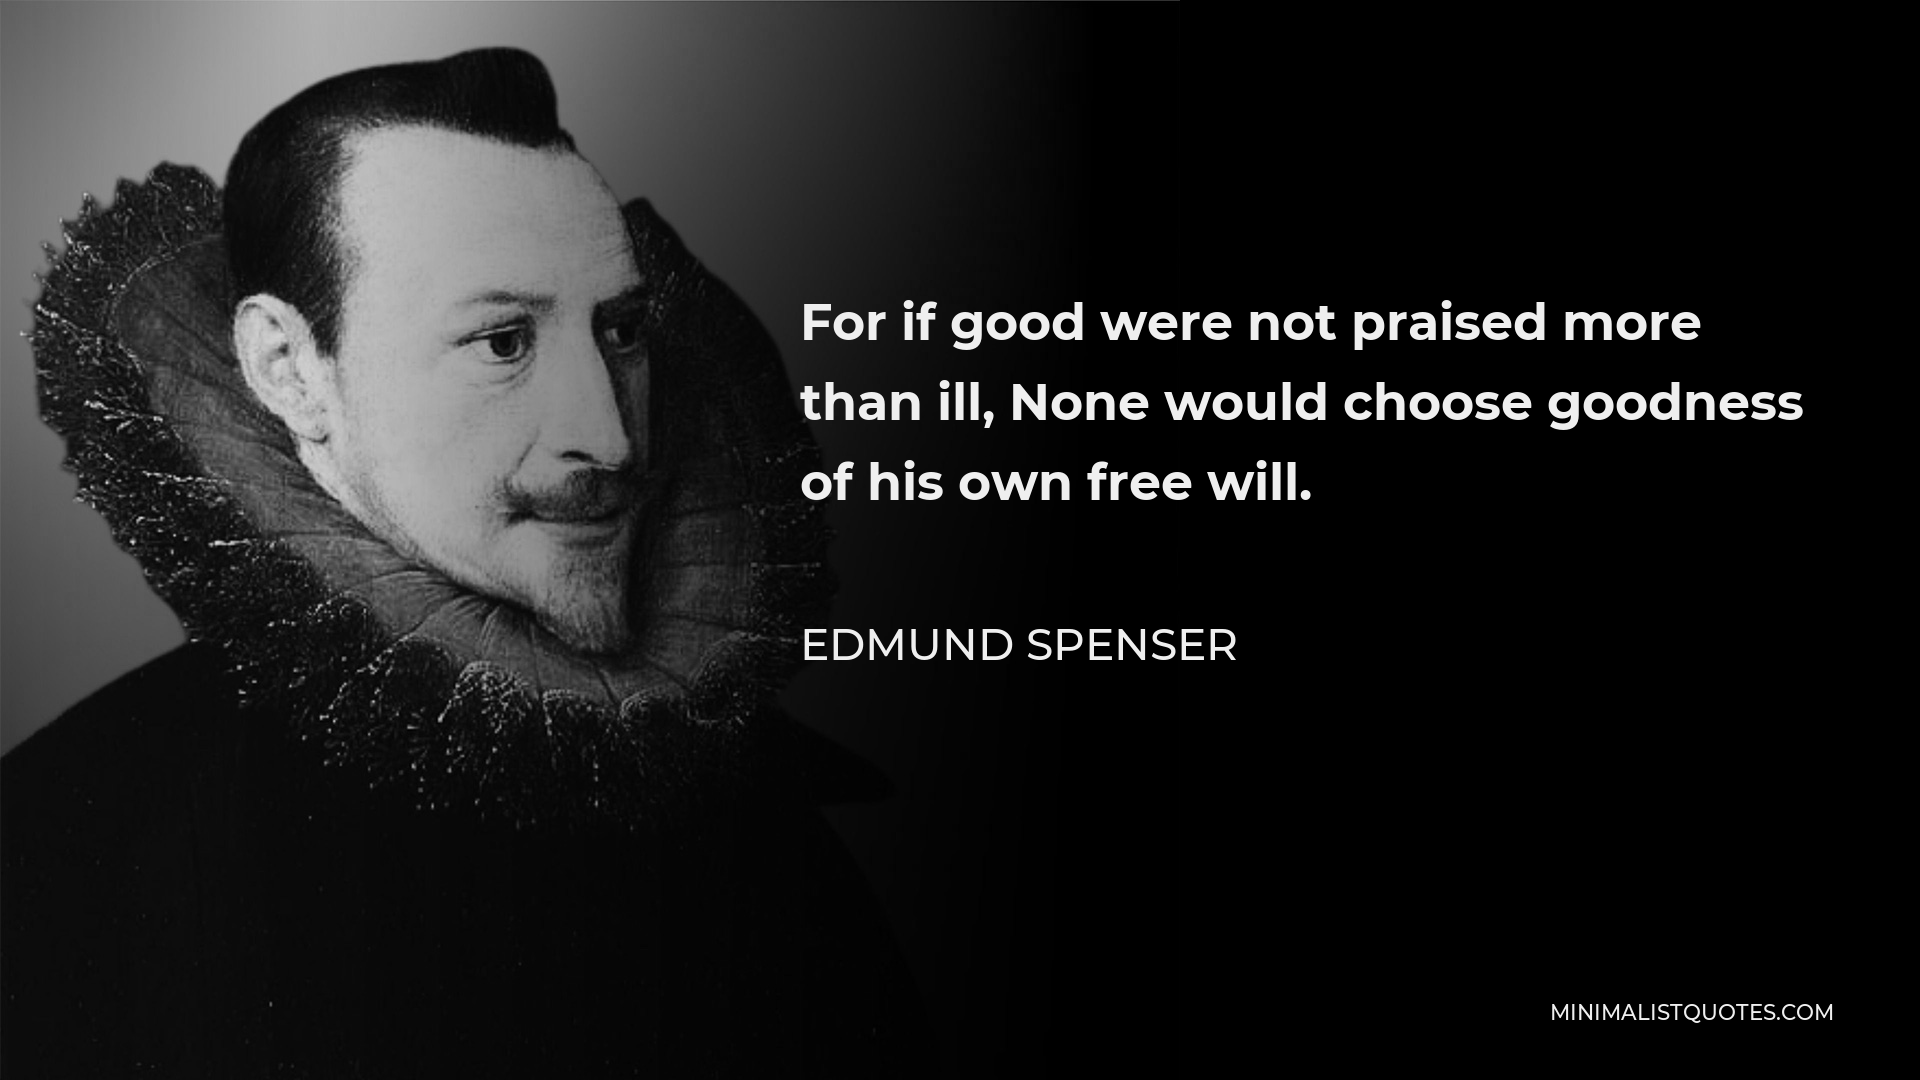 Edmund Spenser Quote - For if good were not praised more than ill, None would choose goodness of his own free will.